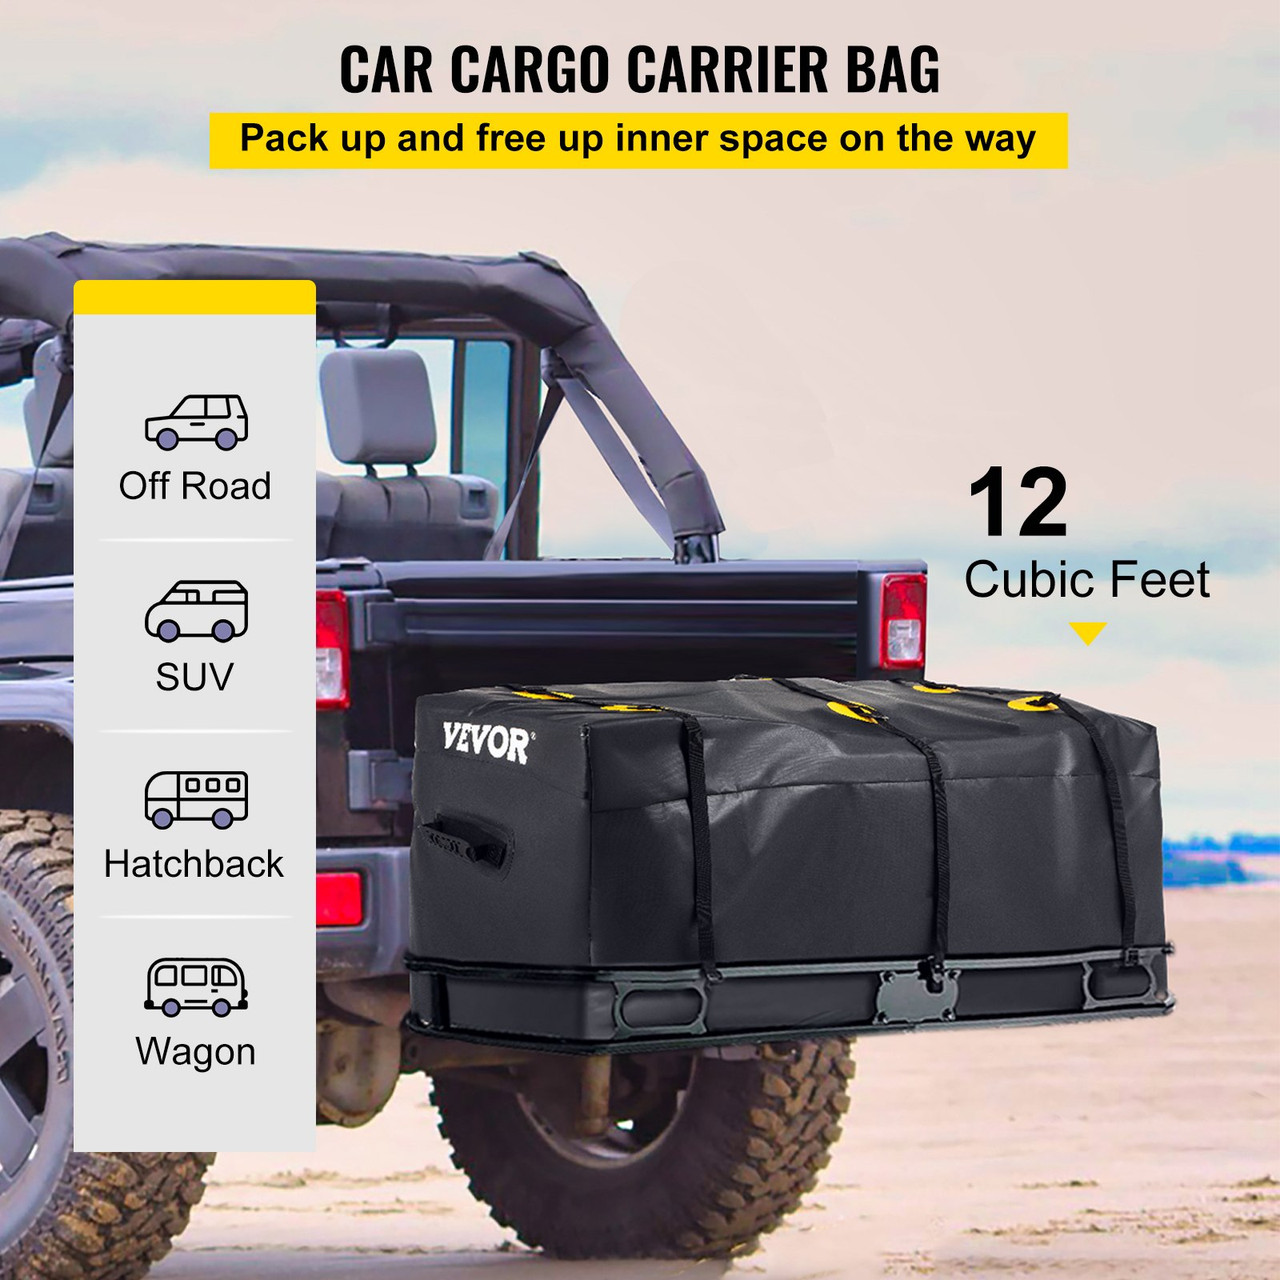 Cargo Carrier Bag Car Luggage Storage Hitch Mount Waterproof 12 Cubic